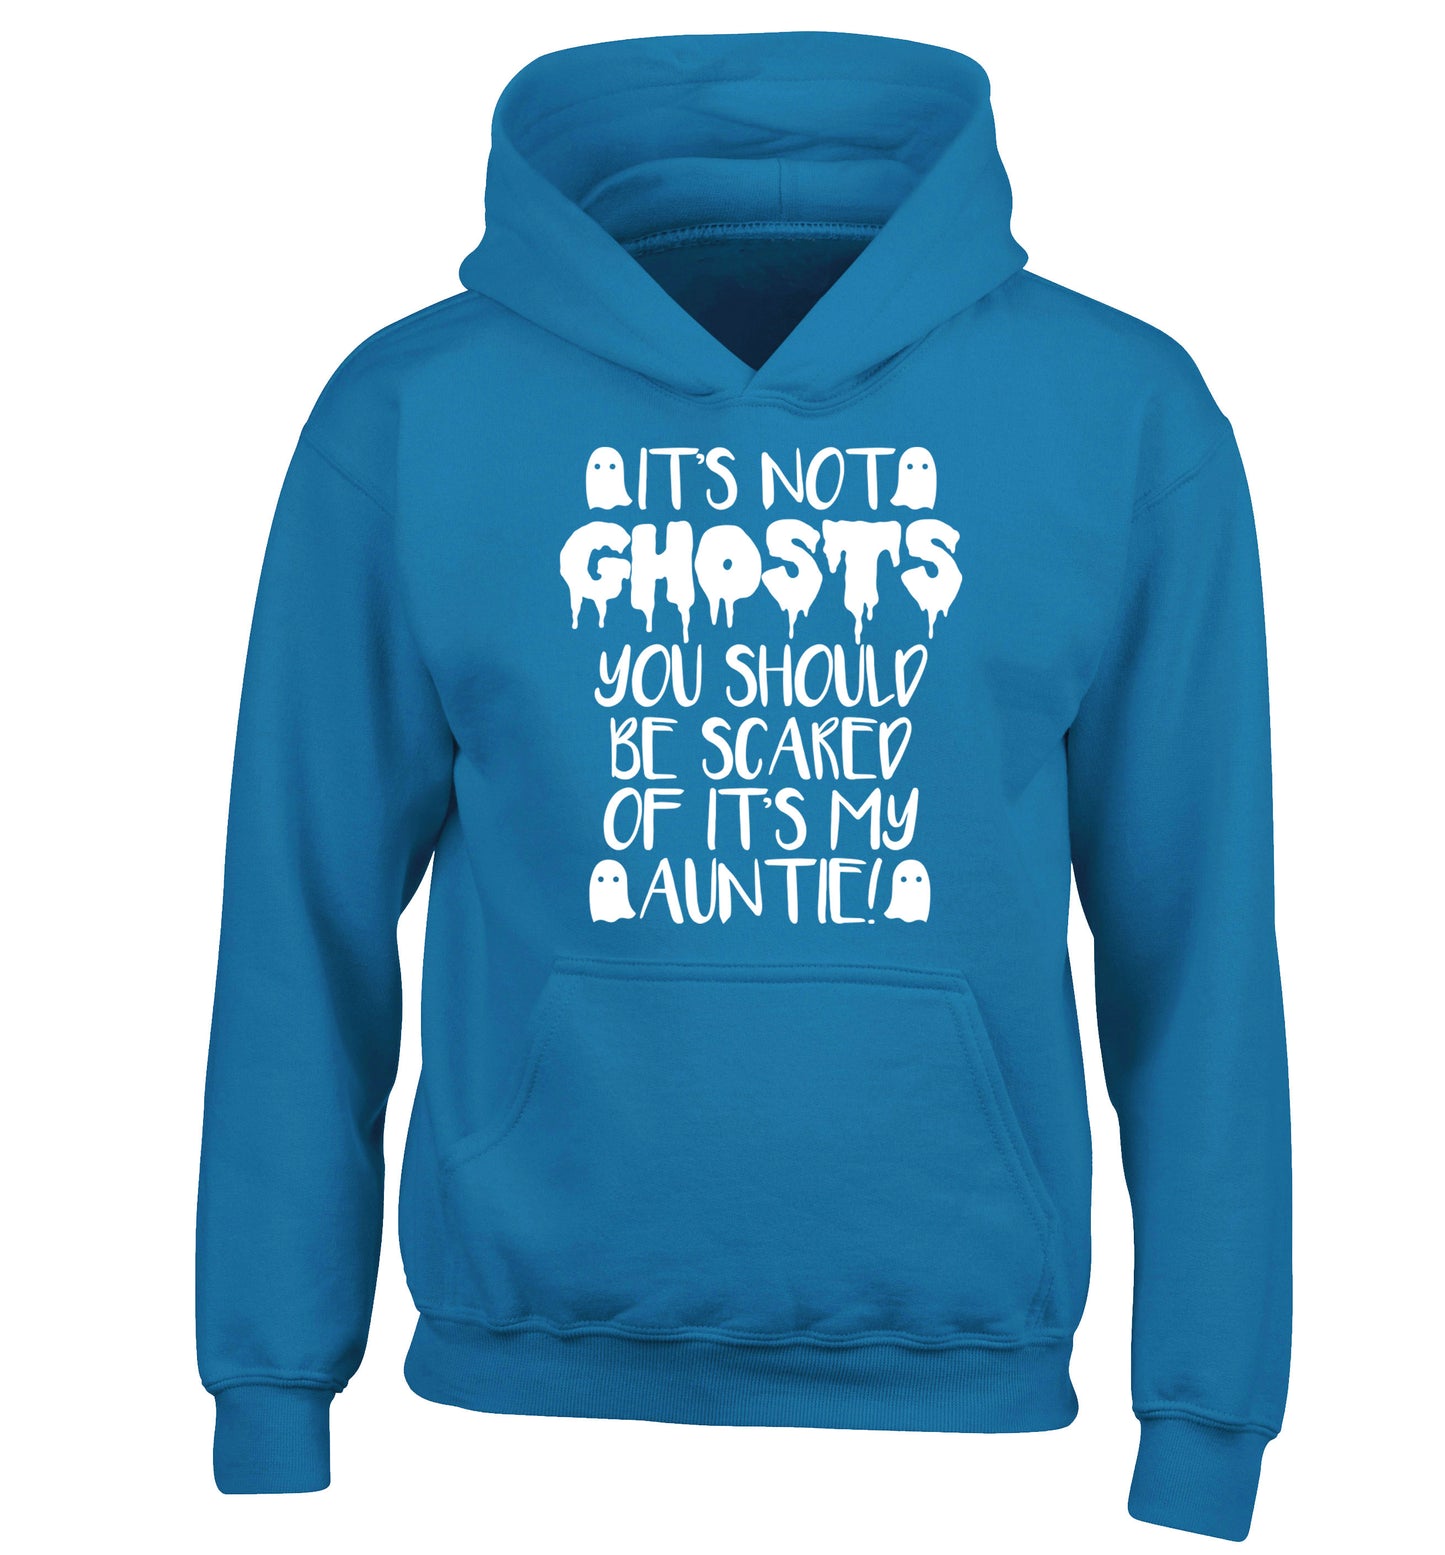 It's not ghosts you should be scared of it's my auntie! children's blue hoodie 12-14 Years